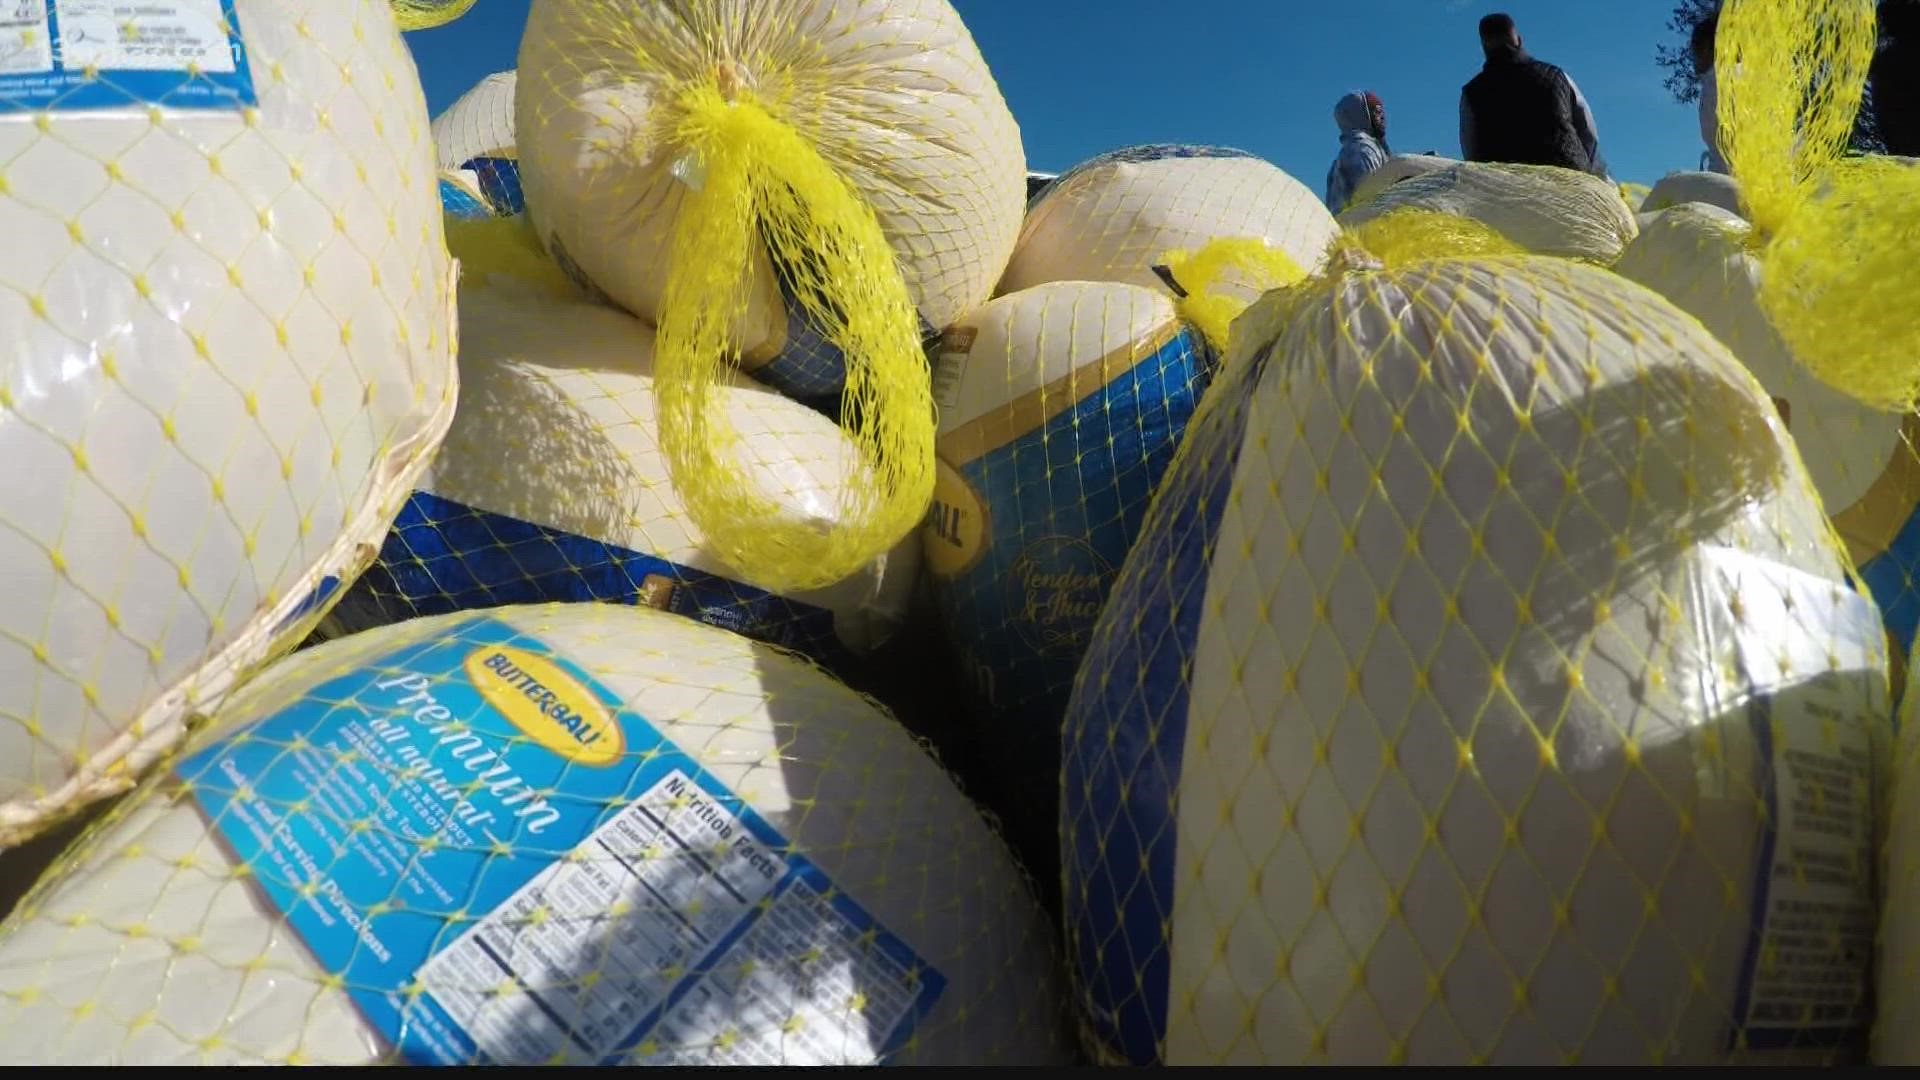 There were 2,500 turkeys and bags filled with all the thanksgiving fixings, like macaroni and cheese, corn bread, stuffing, corn, etc.